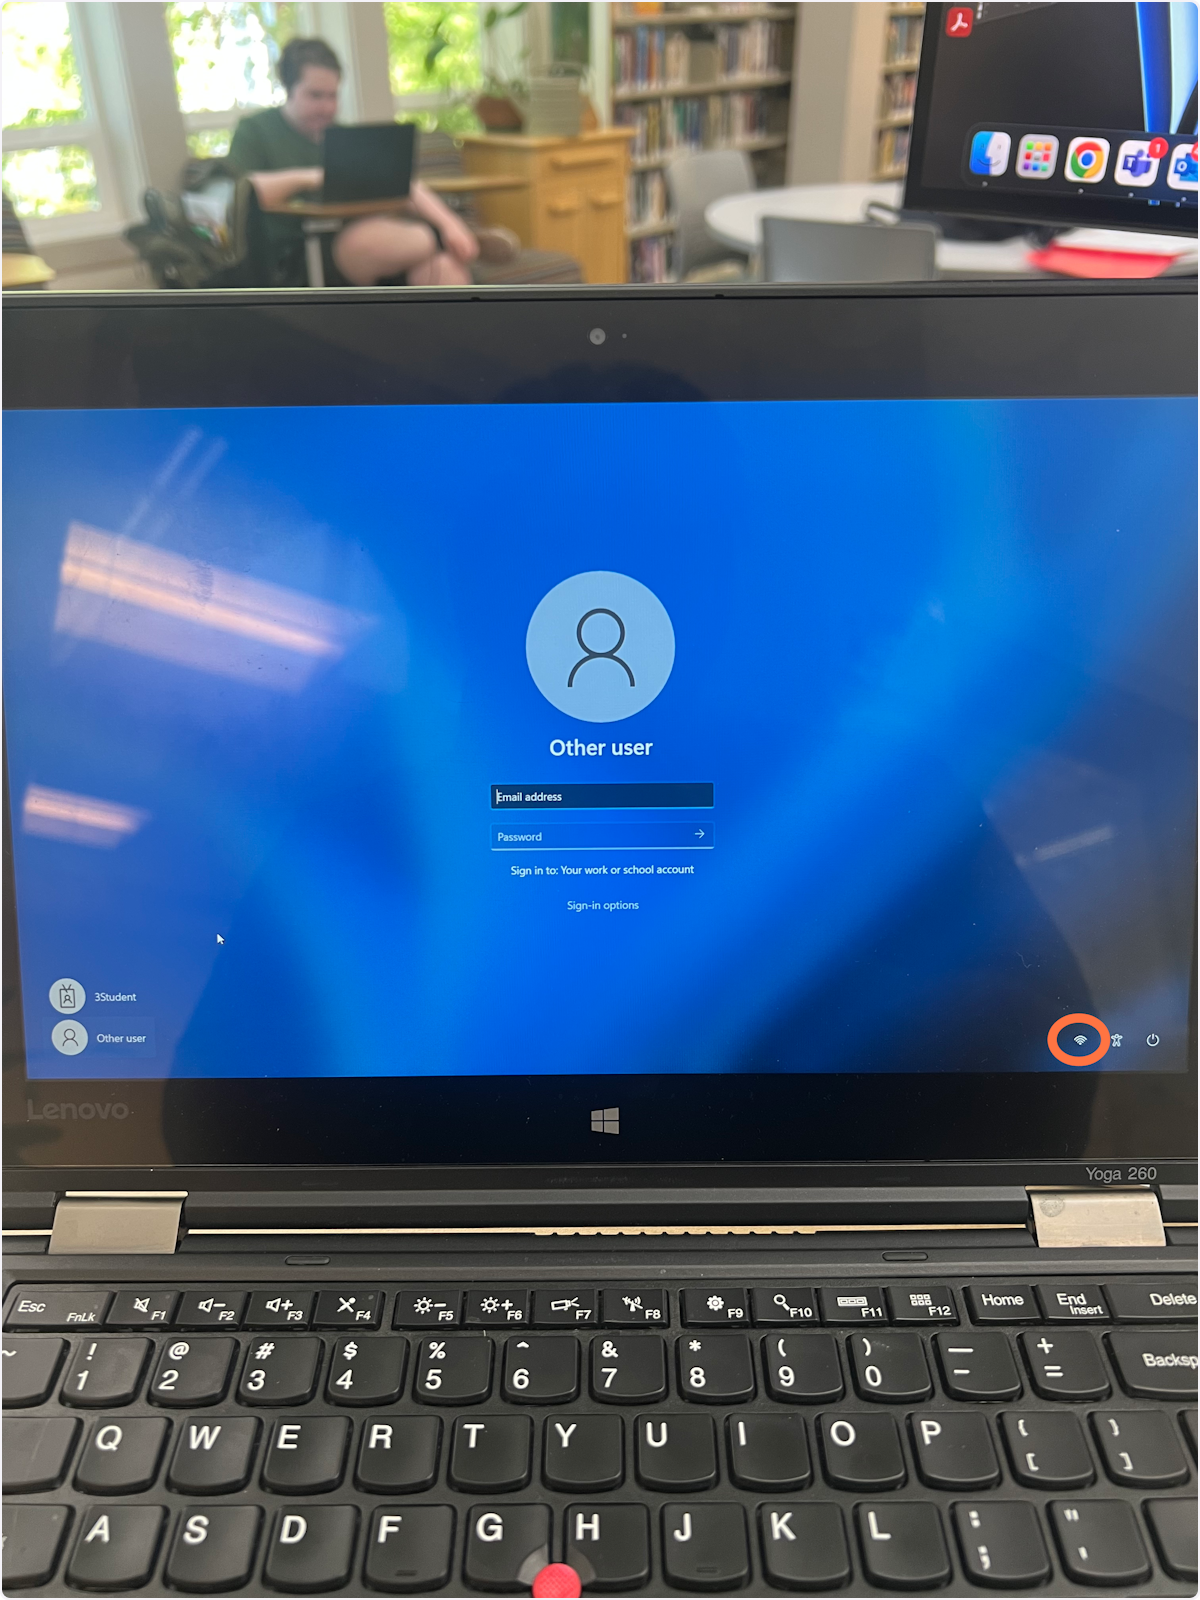 To log students in on windows devices, they will use their own credentials:
Overlake Email
Password
If you receive an error other than incorrect password, you are likely not connected to the wifi 'Overlake', you can fix that by selecting the wifi icon indicated by the circle.